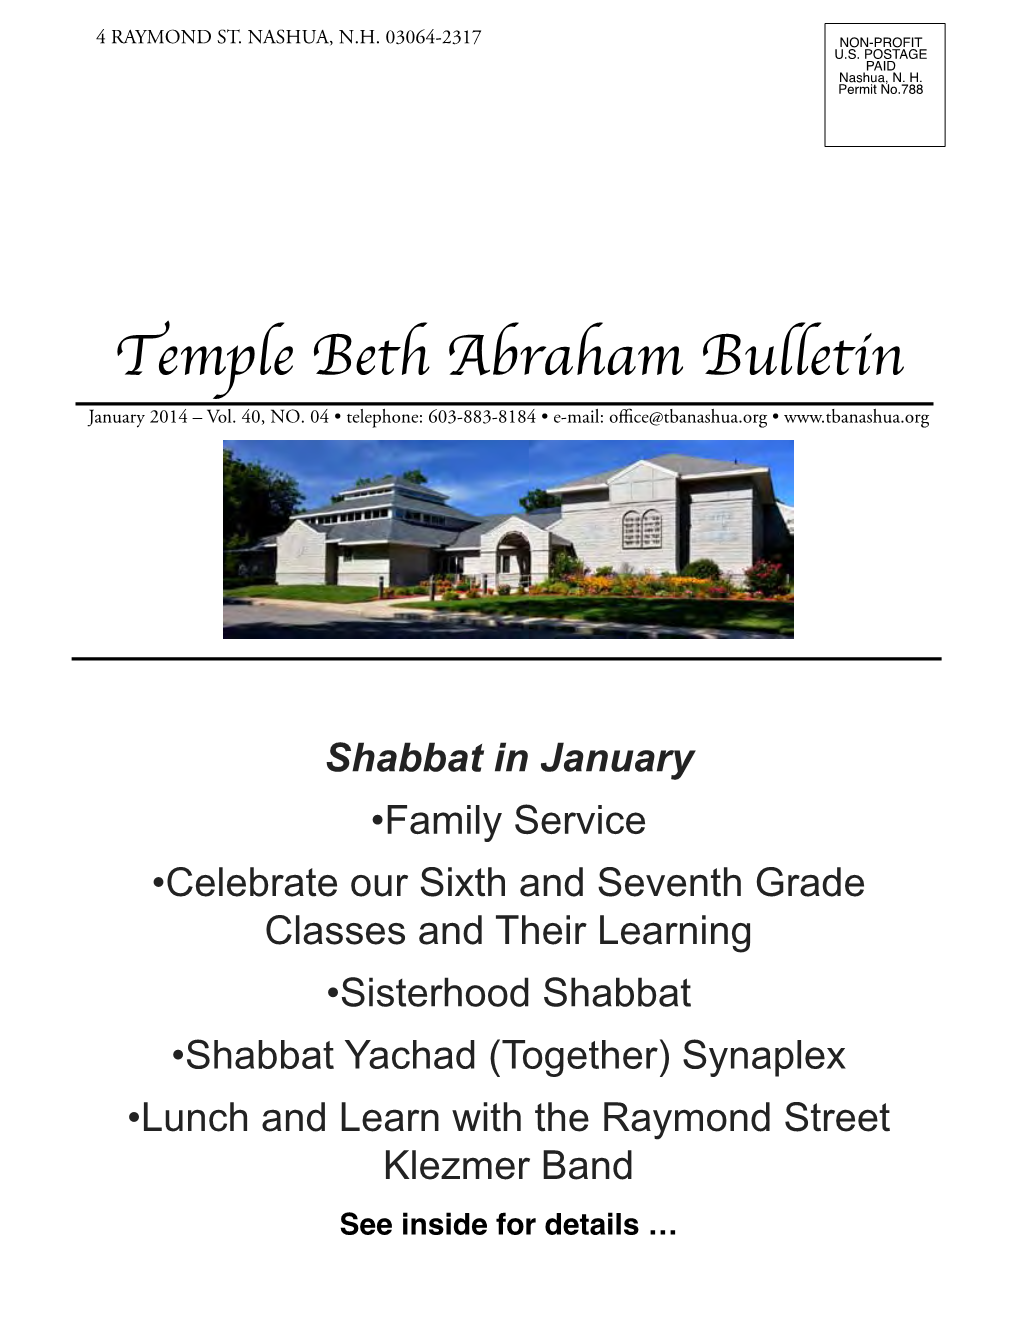 Shabbat in January •Family Service •Celebrate Our Sixth and Seventh